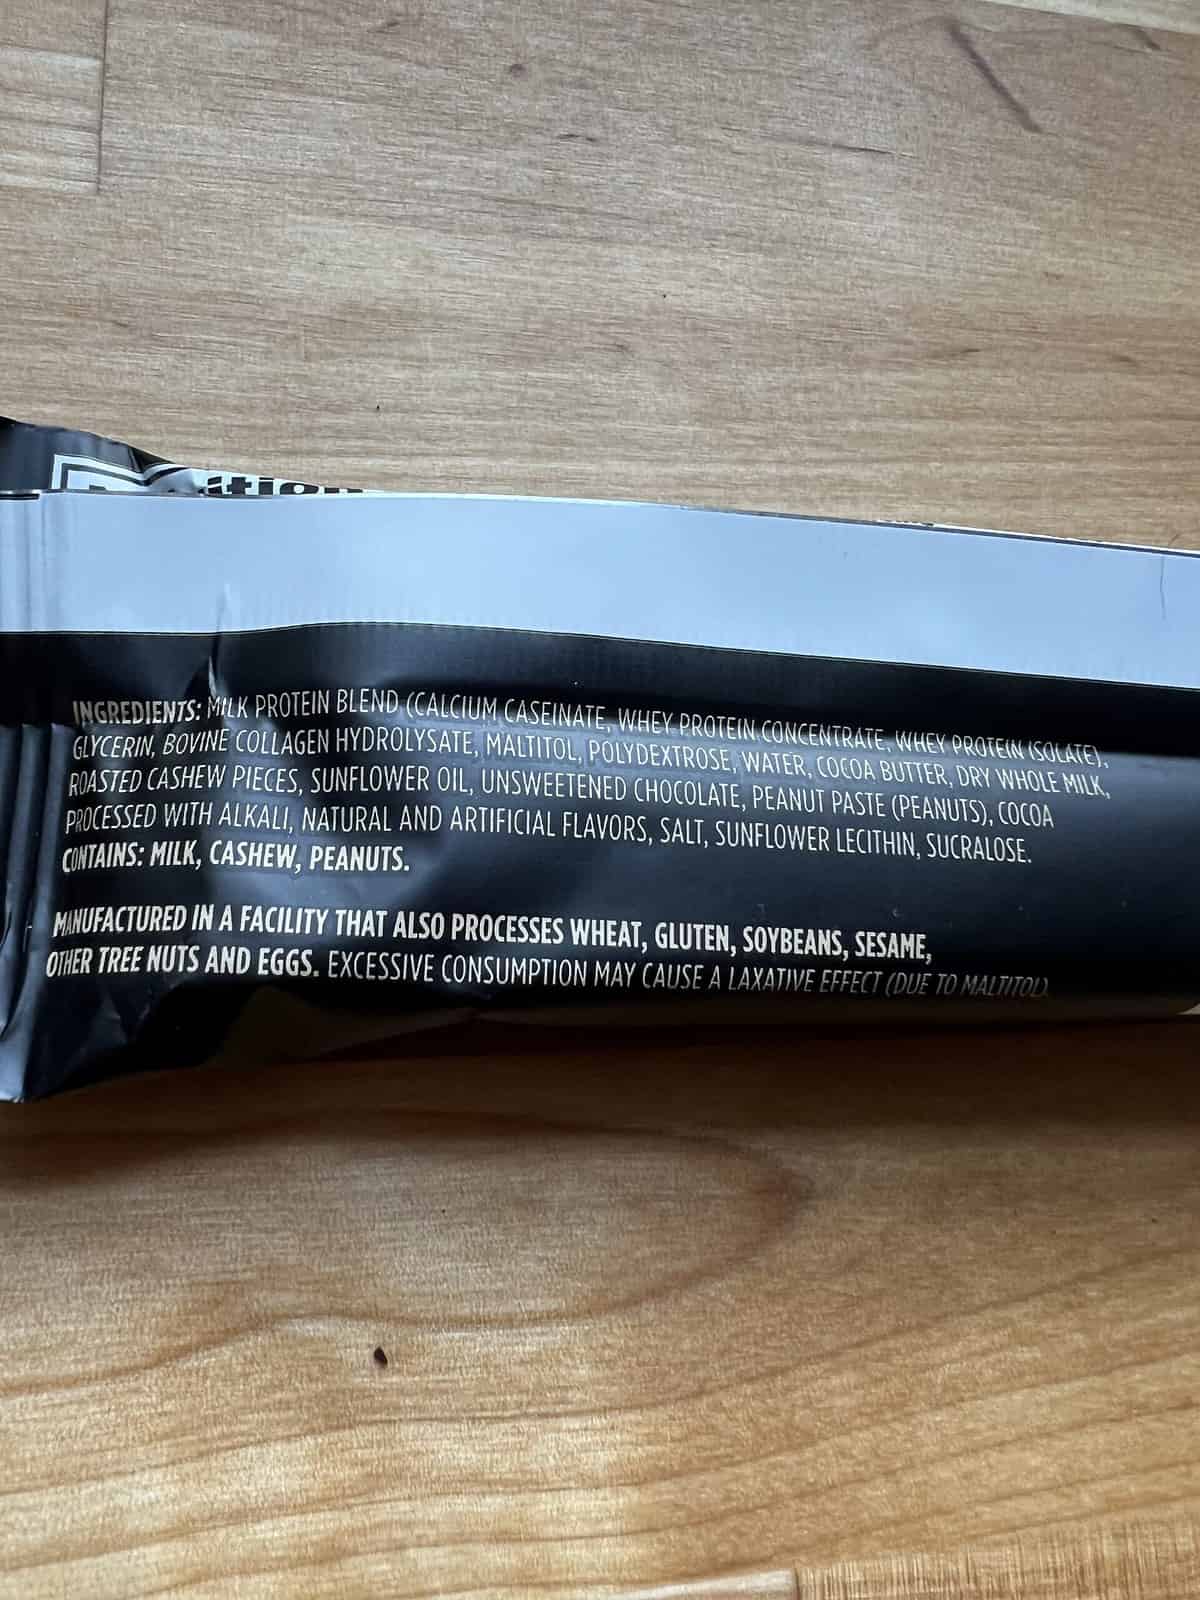 Barebell Protein Bar ingredients